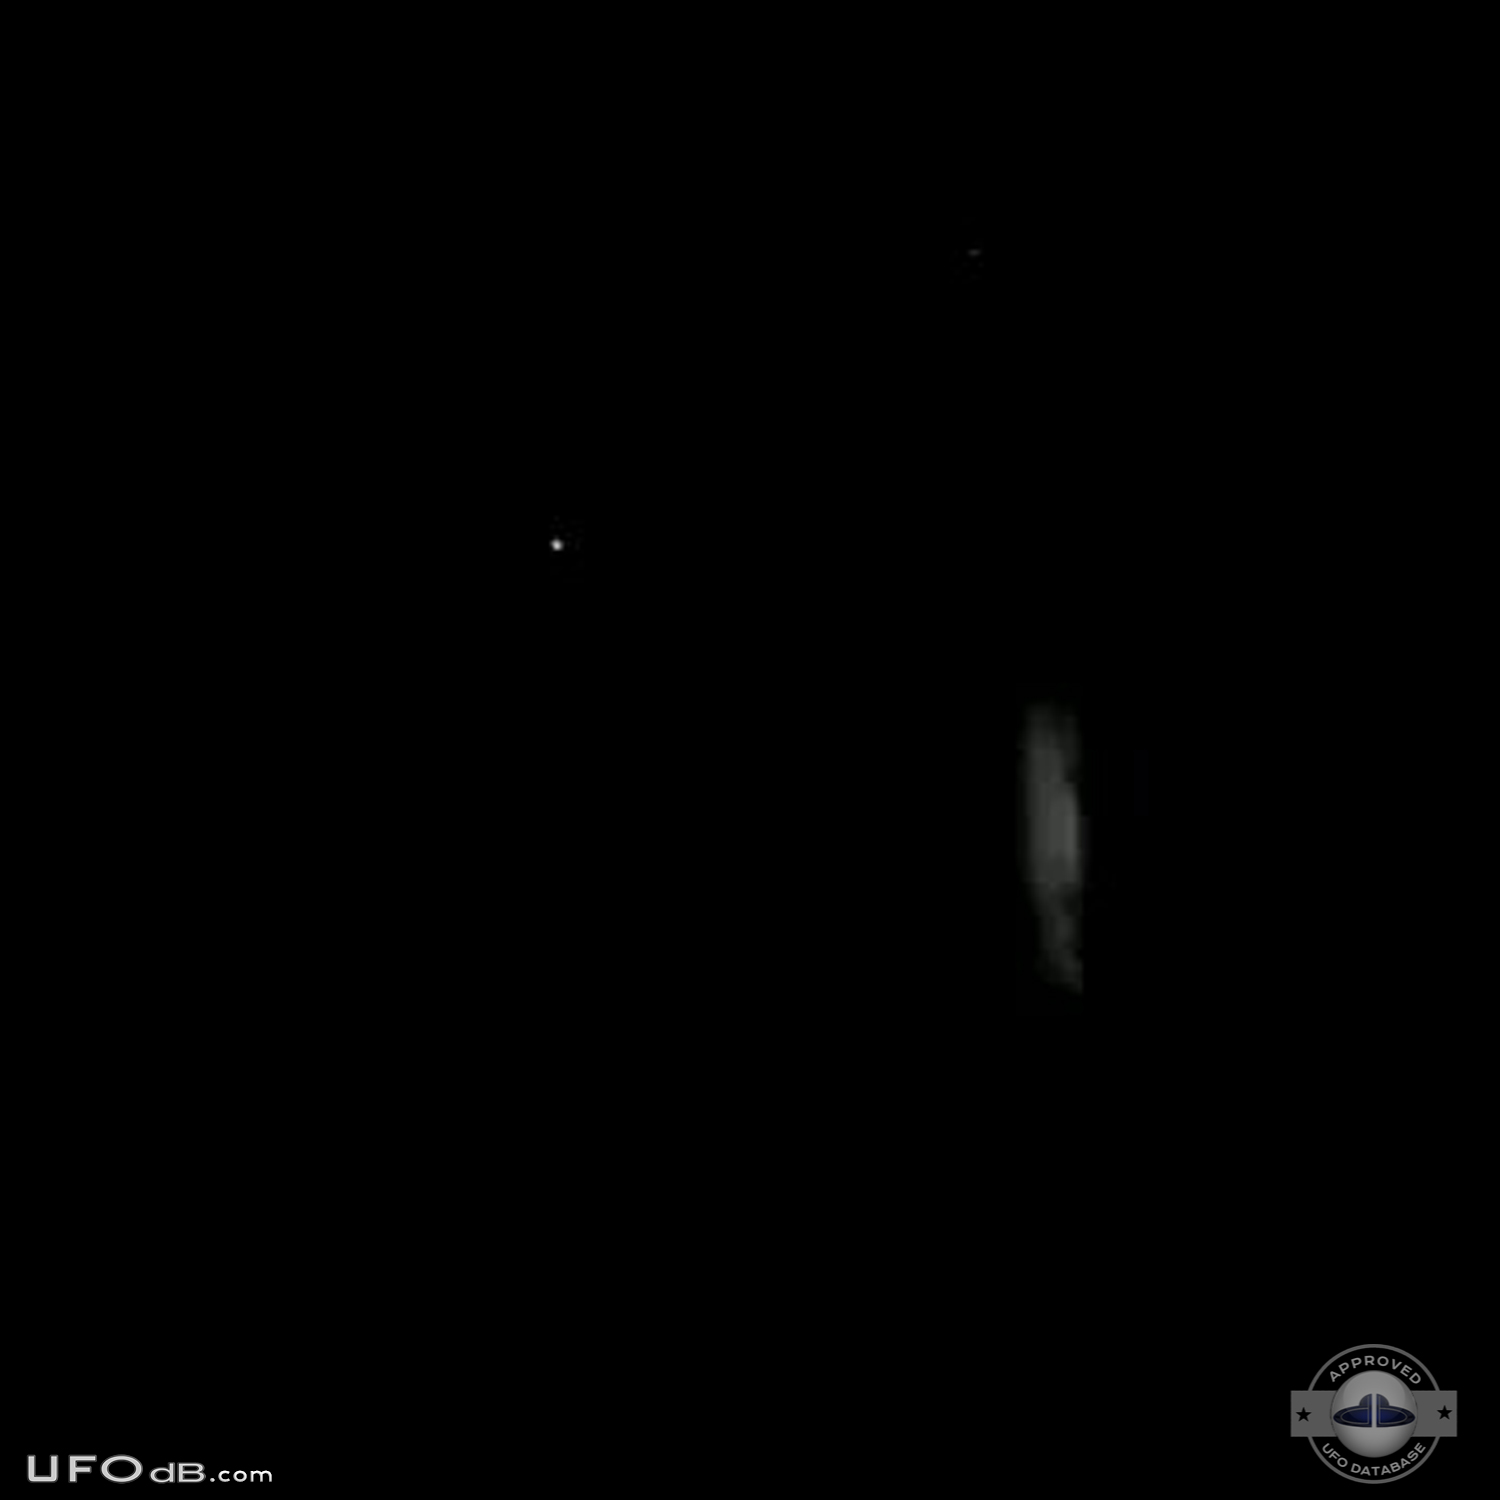 UFO changing shapes in the night over Concord in California - 2013 UFO Picture #544-1